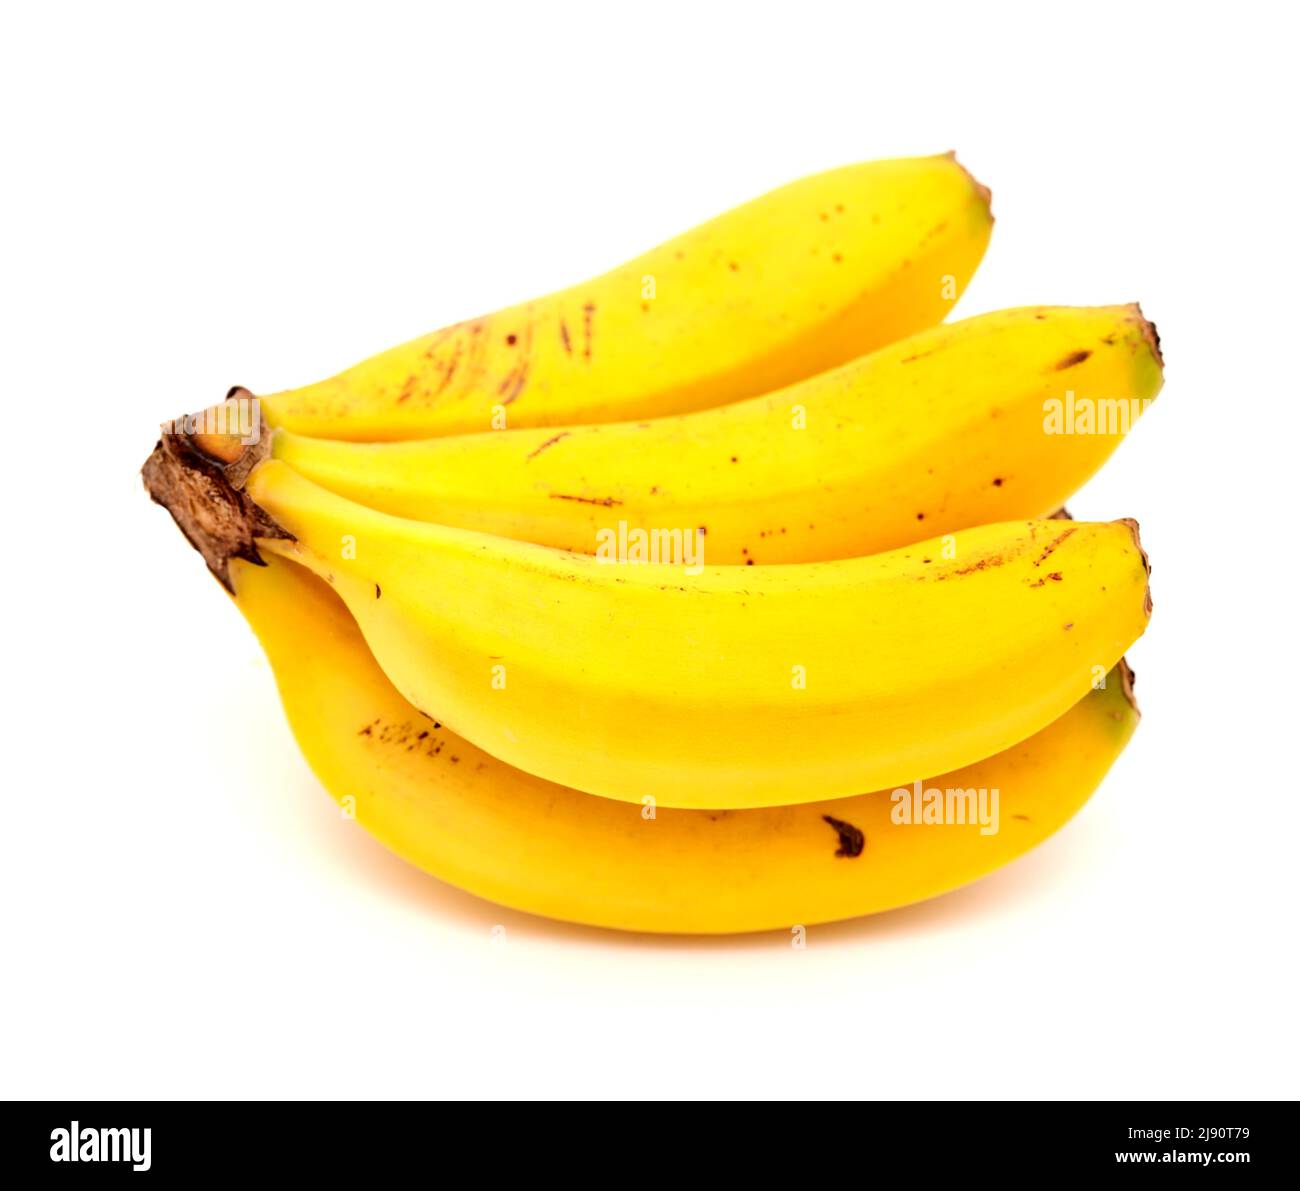 bunch of small bananas from  Canary Islands, Spain Stock Photo